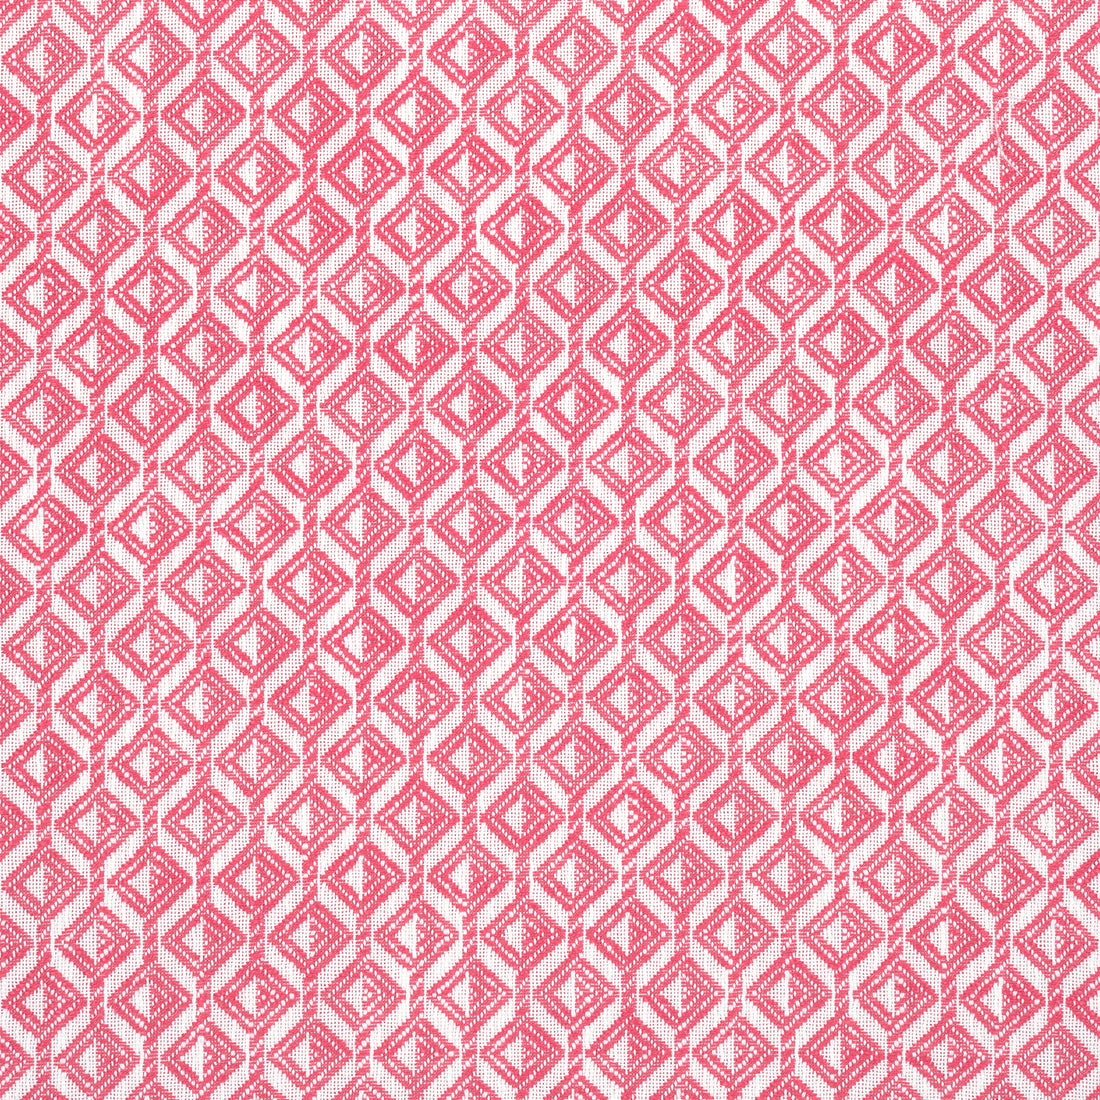 Trion fabric in peony color - pattern number W73454 - by Thibaut in the Landmark collection